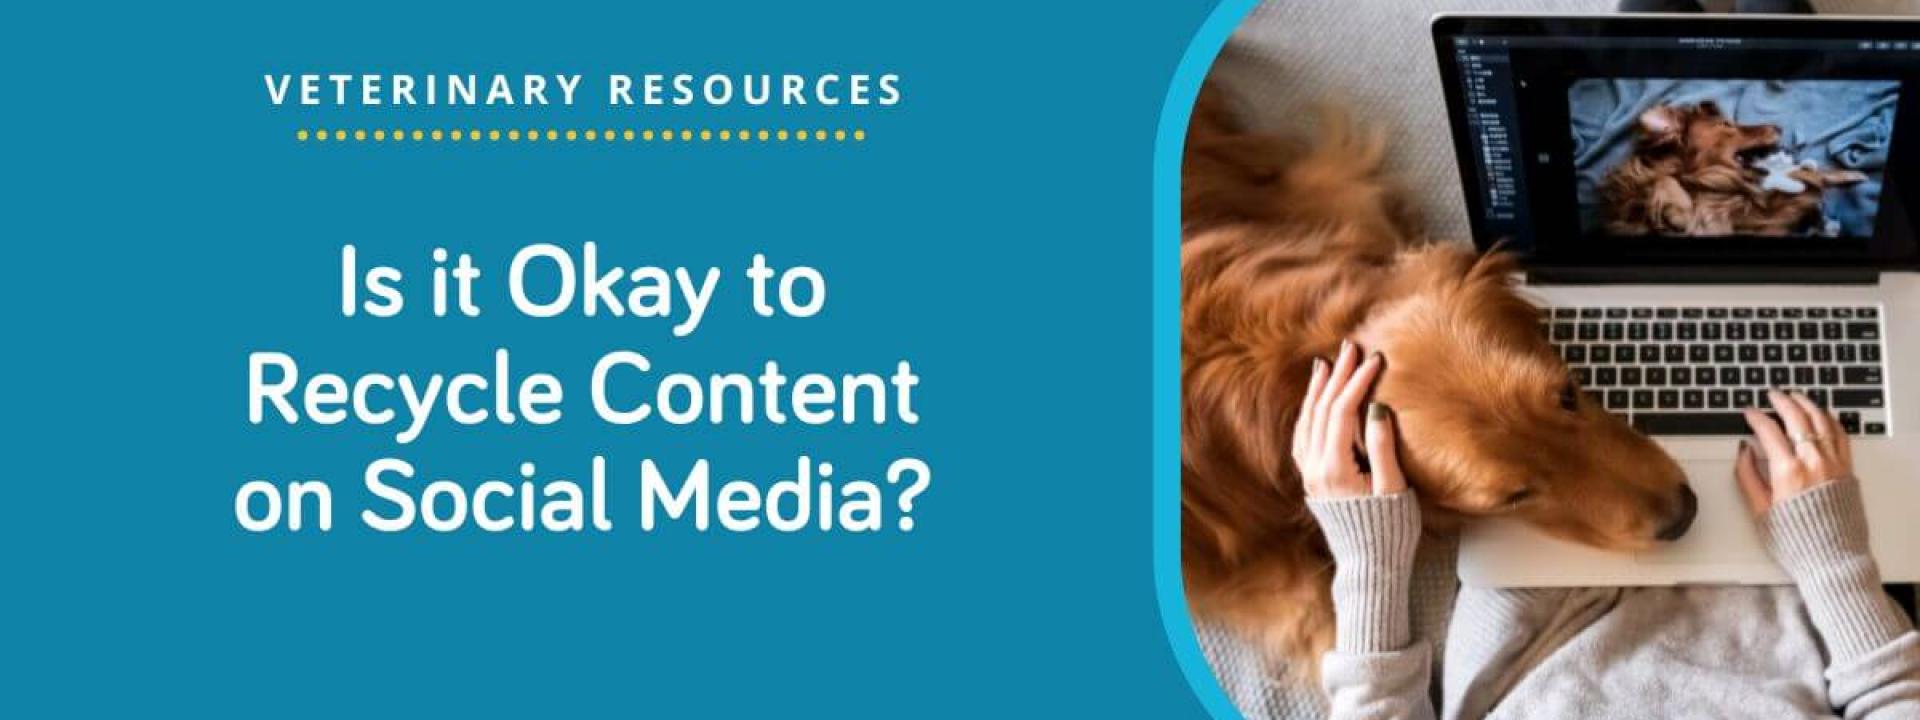 Is it Okay to Recycle Content on Social Media?